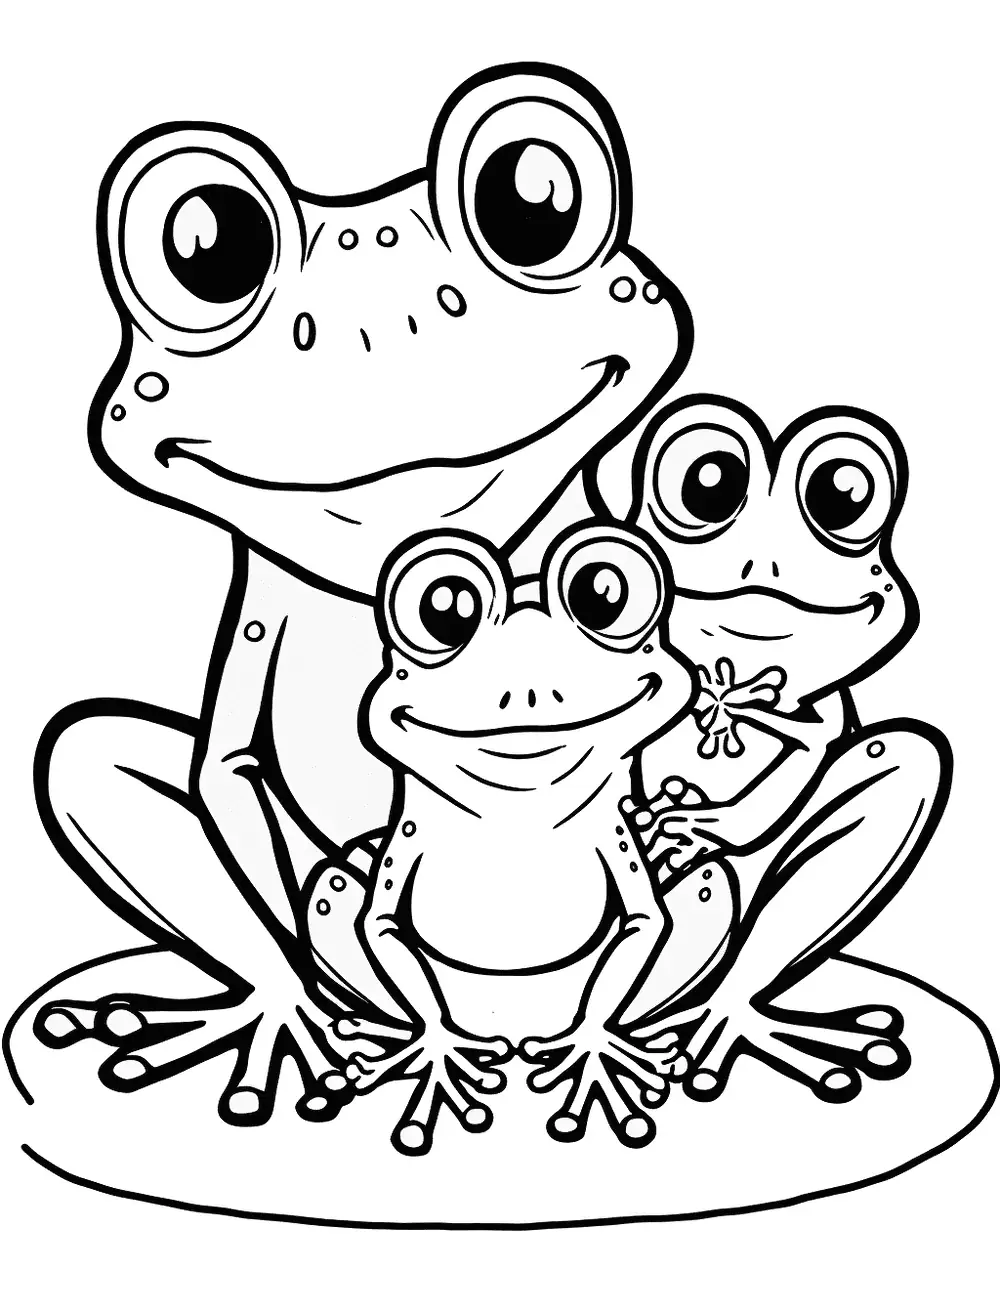 Cartoon Frog Family Coloring Page - A family of cartoon frogs, each with a different personality.